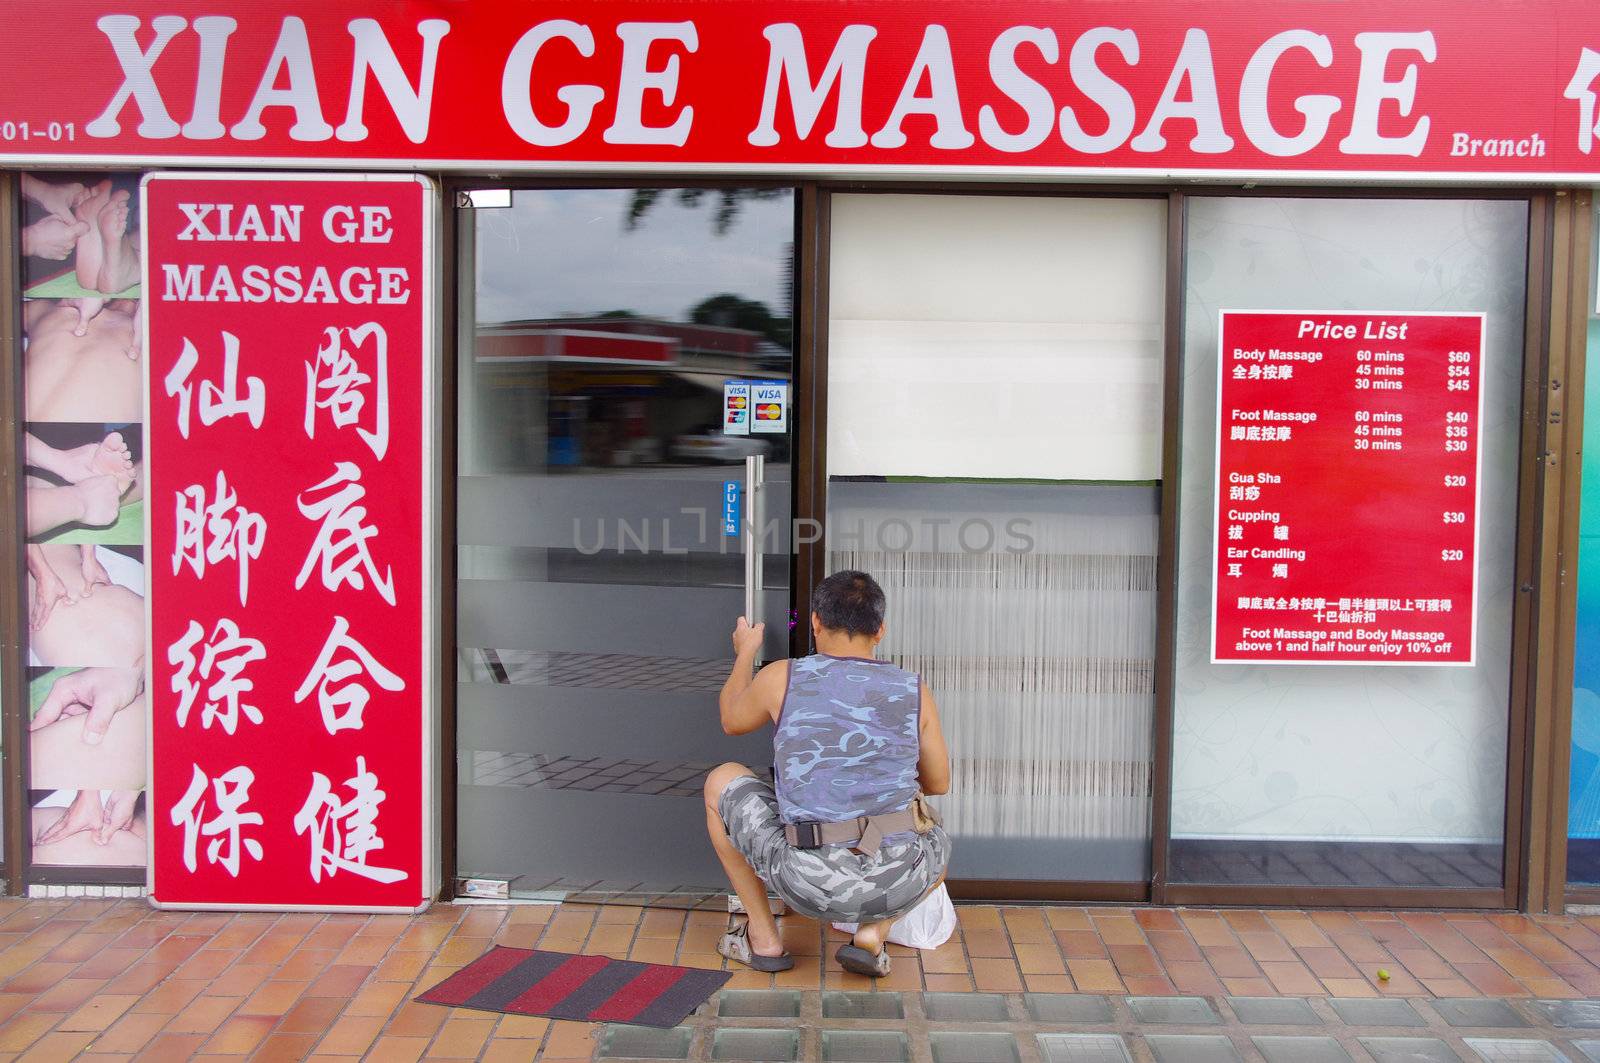 Massage and reflexology parlour in Singapore. Wellness tourism is now big business in Asia, with numerous Spas, saunas and massage parlours.